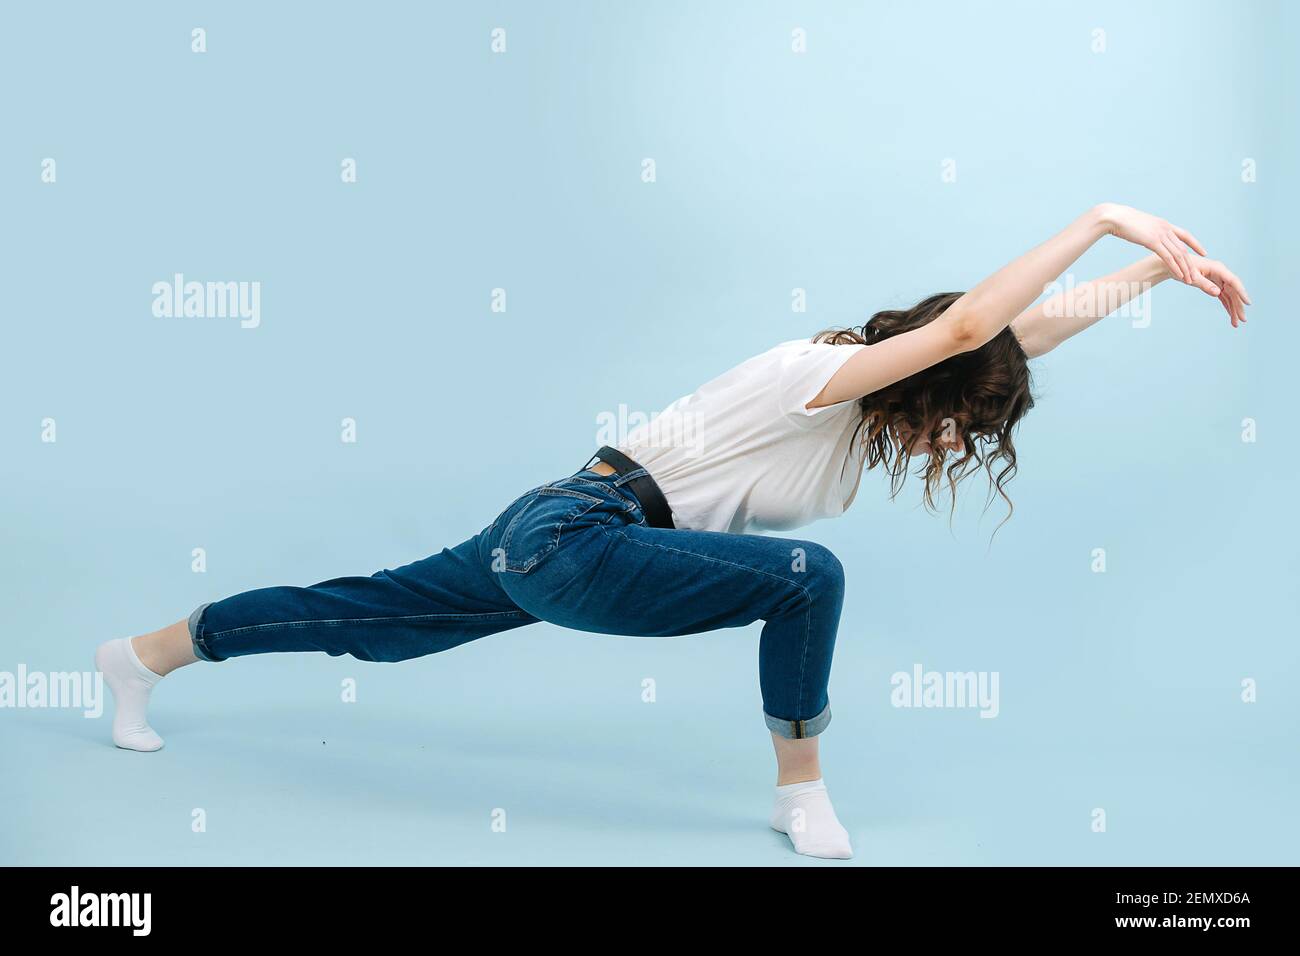 Expressive contemporary dancer lunging body forward, making wave like motions. Stock Photo